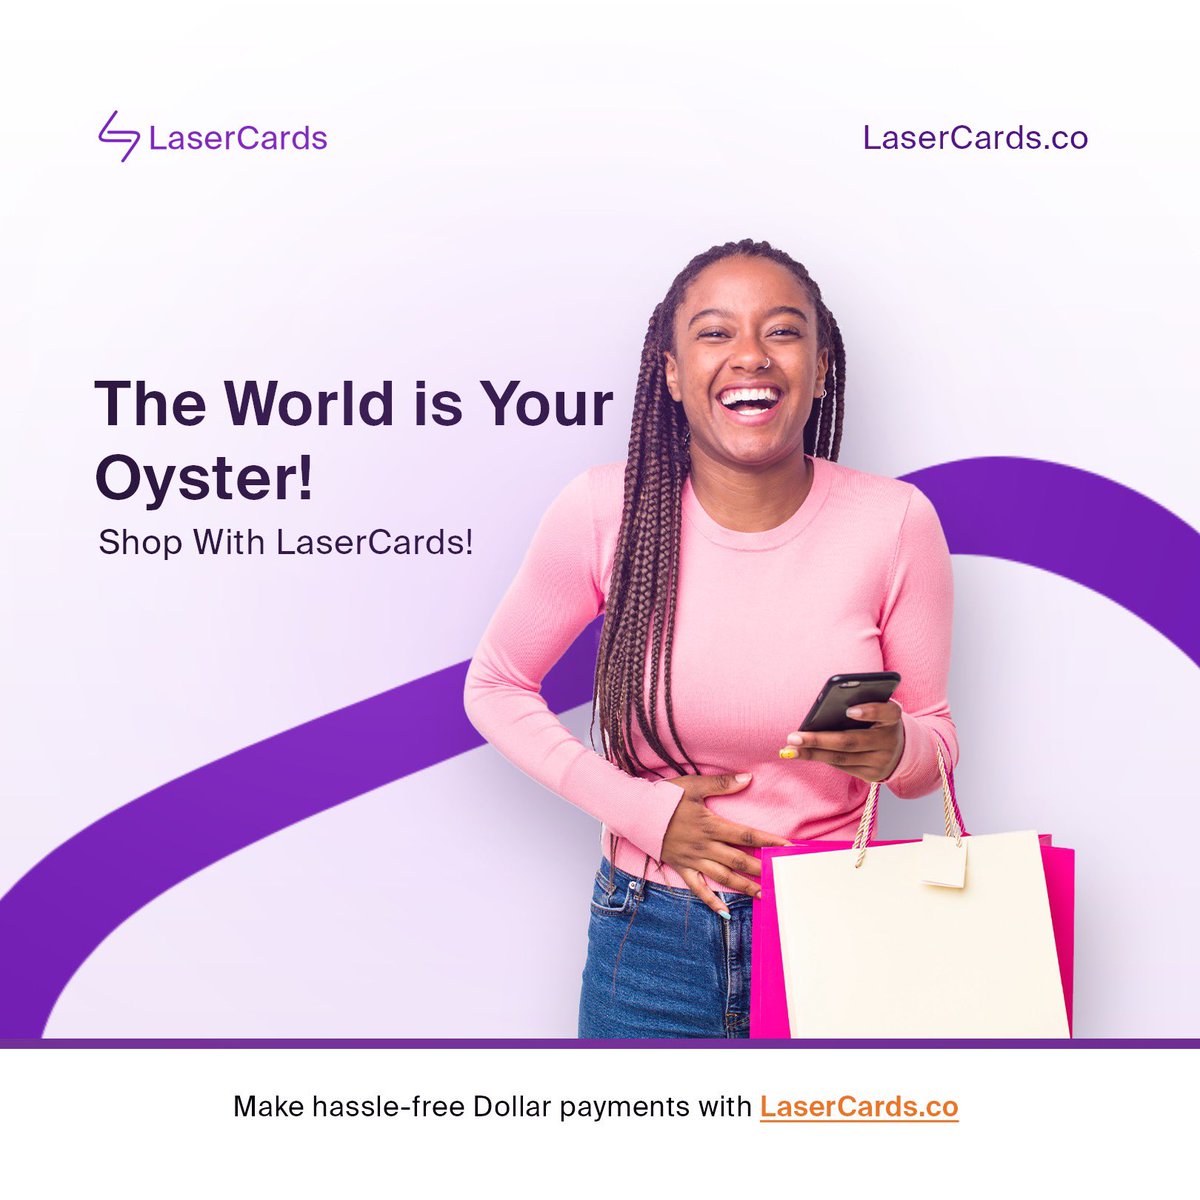 Shop effortlessly with your LaserCards Virtual Dollar Card.

Follow @lasercardsco for more valuable financial tips, deals and seamless payment solutions.

#LaserCardsCo #LaserCards #VirtualDollarCards #VirtualPayments #OnlinePayments #DollarCards